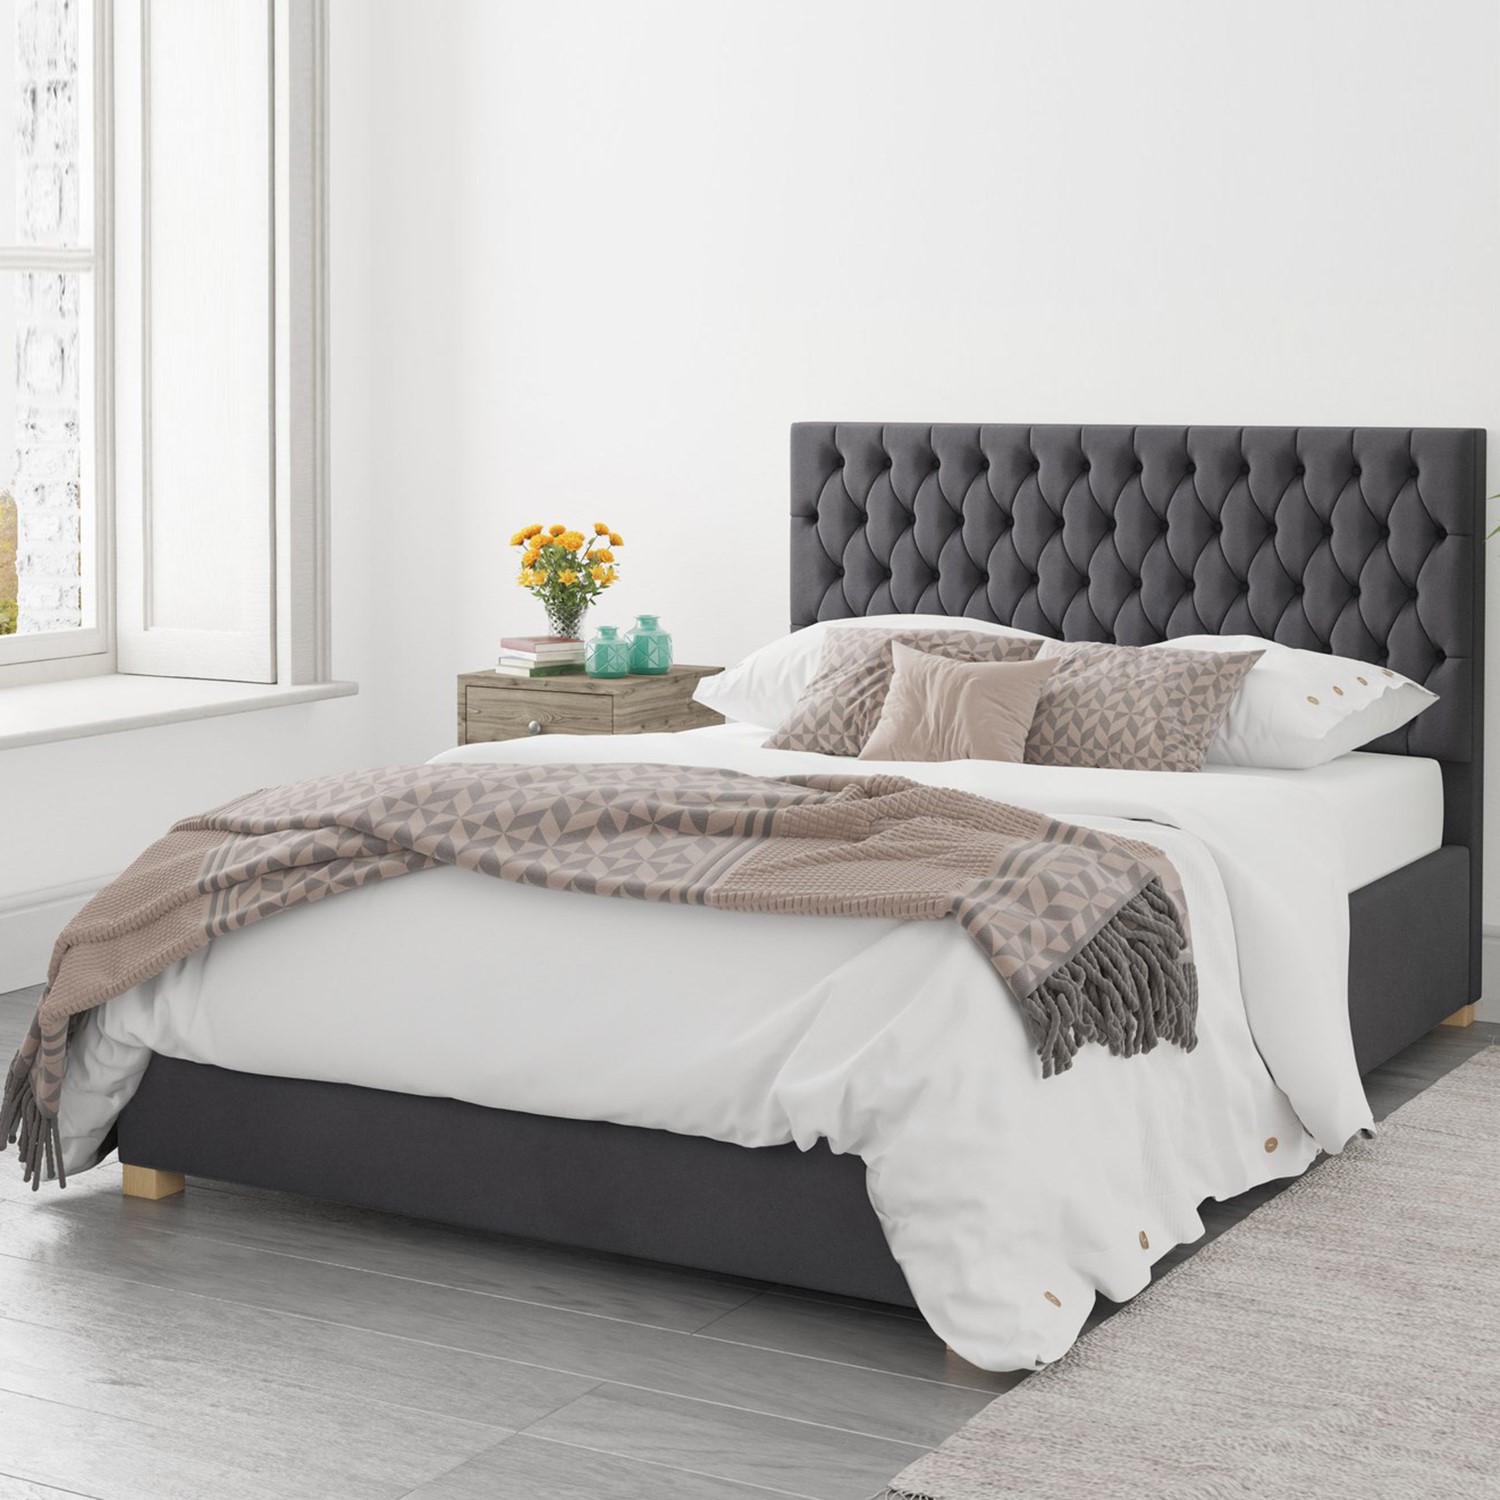 Read more about Dark grey velvet king size ottoman bed angel aspire